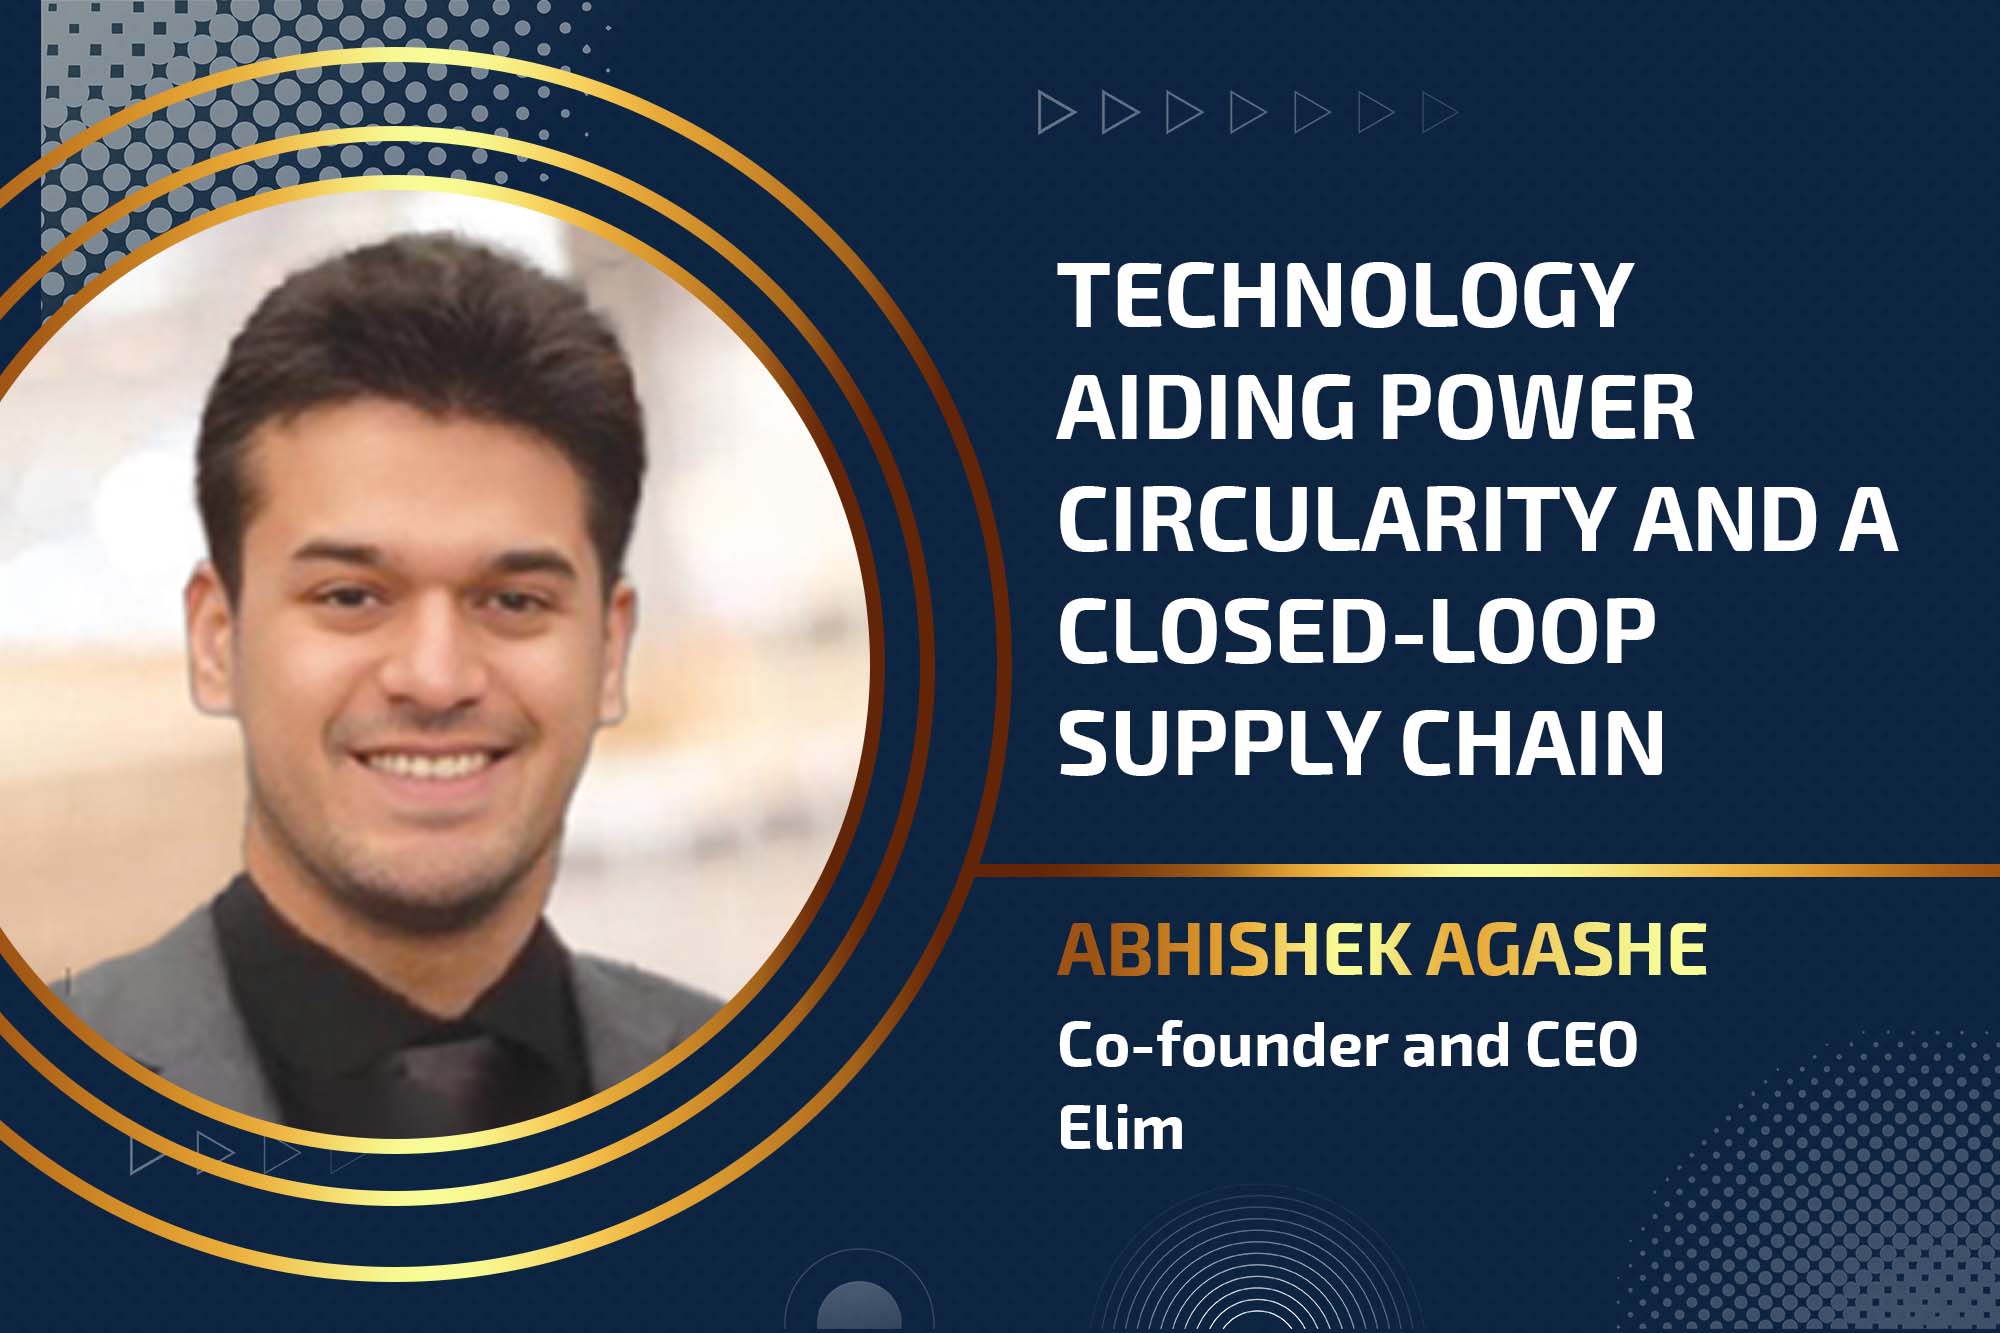 Technology aiding power circularity and a closed-loop supply chain